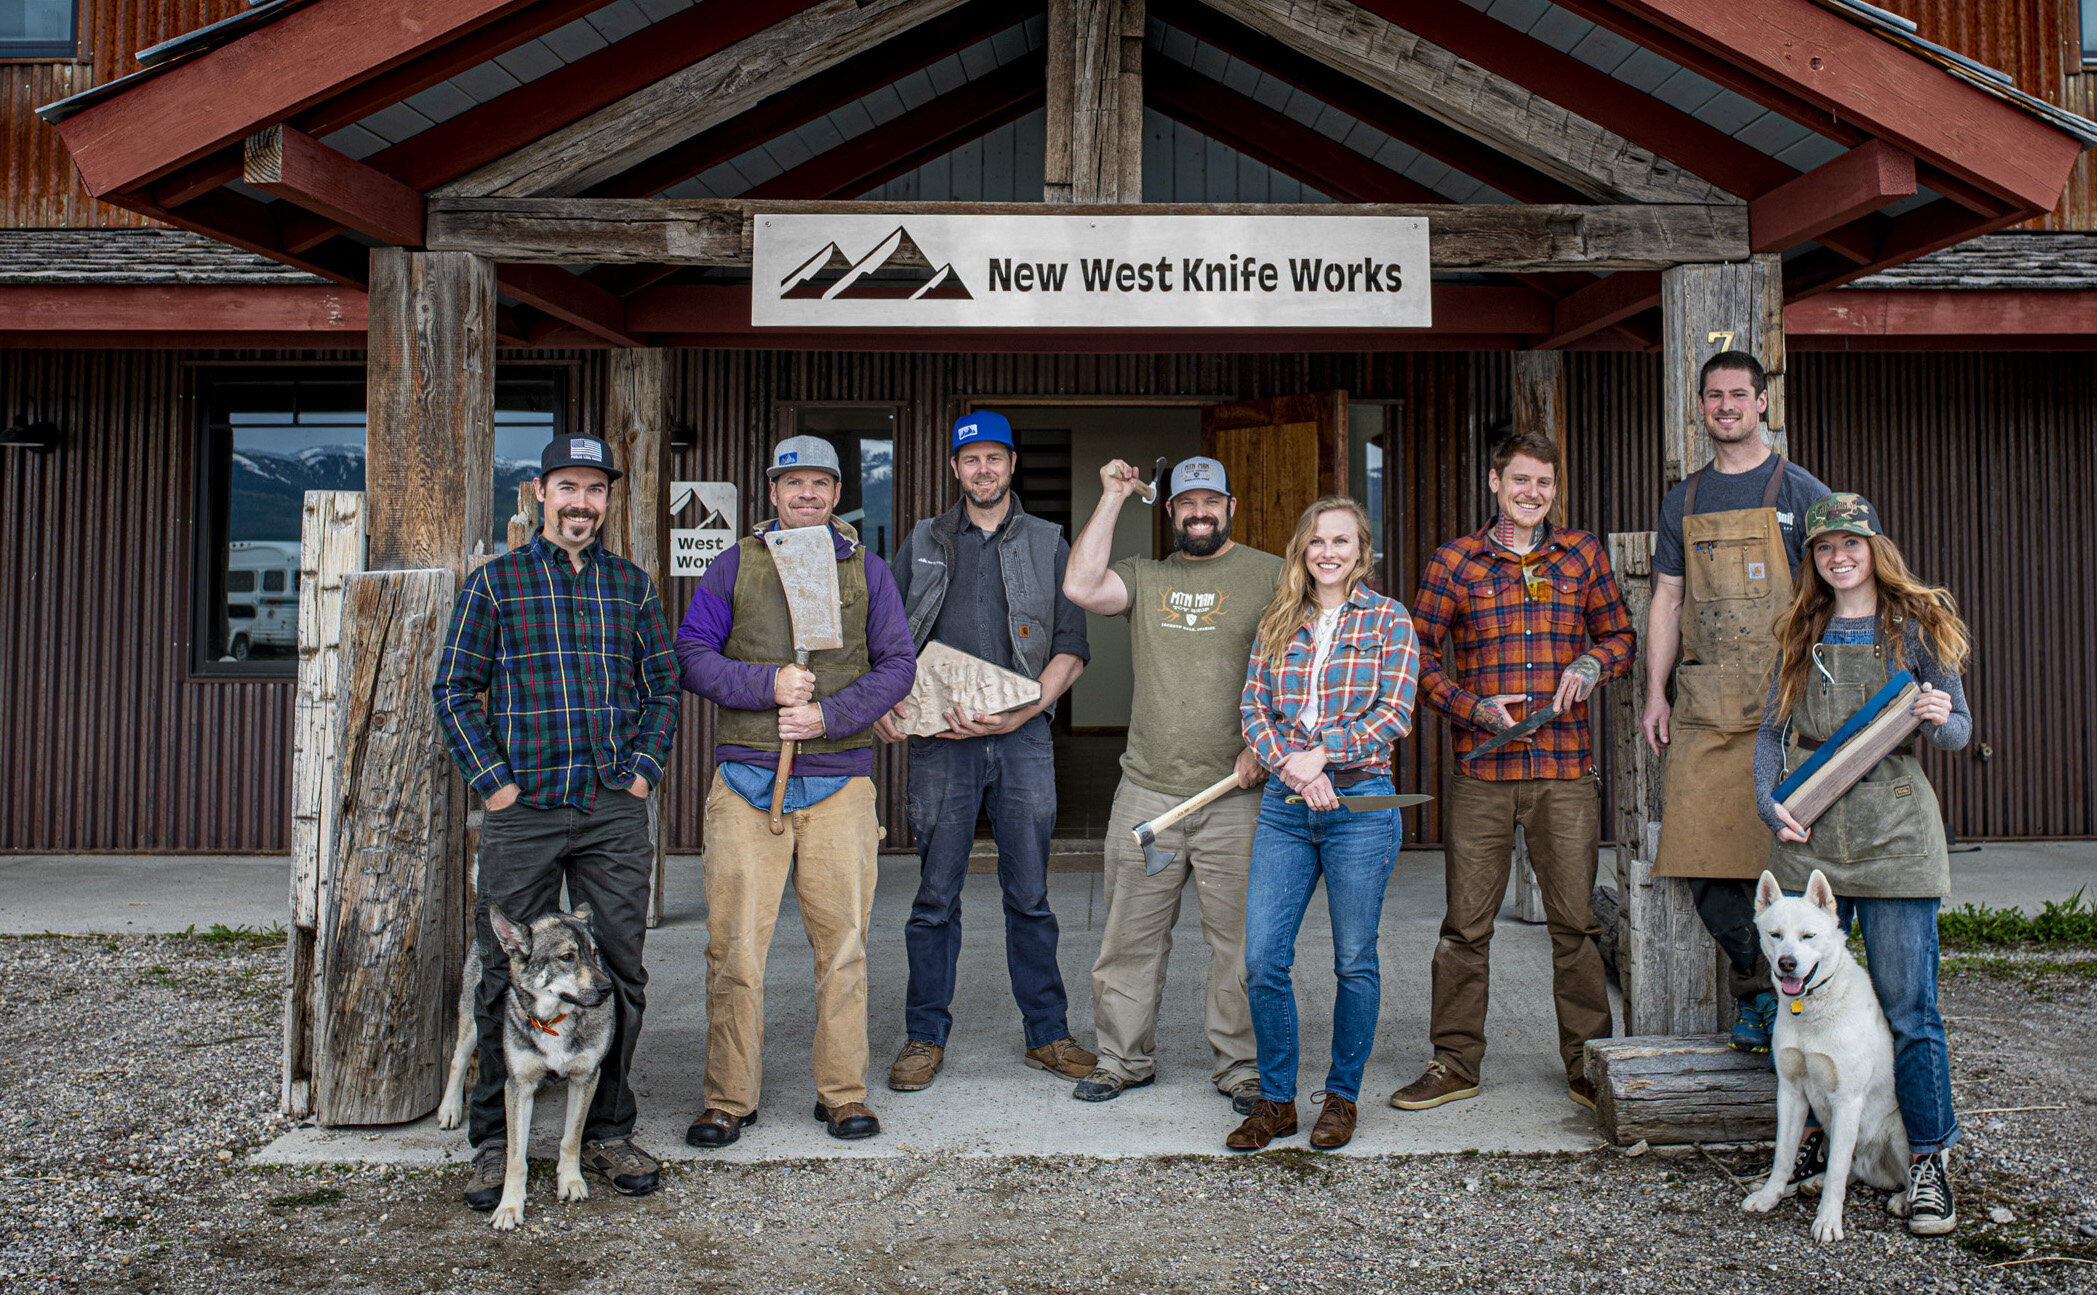 New West KnifeWorks team in Idaho. Photo courtesy of Todd Williams